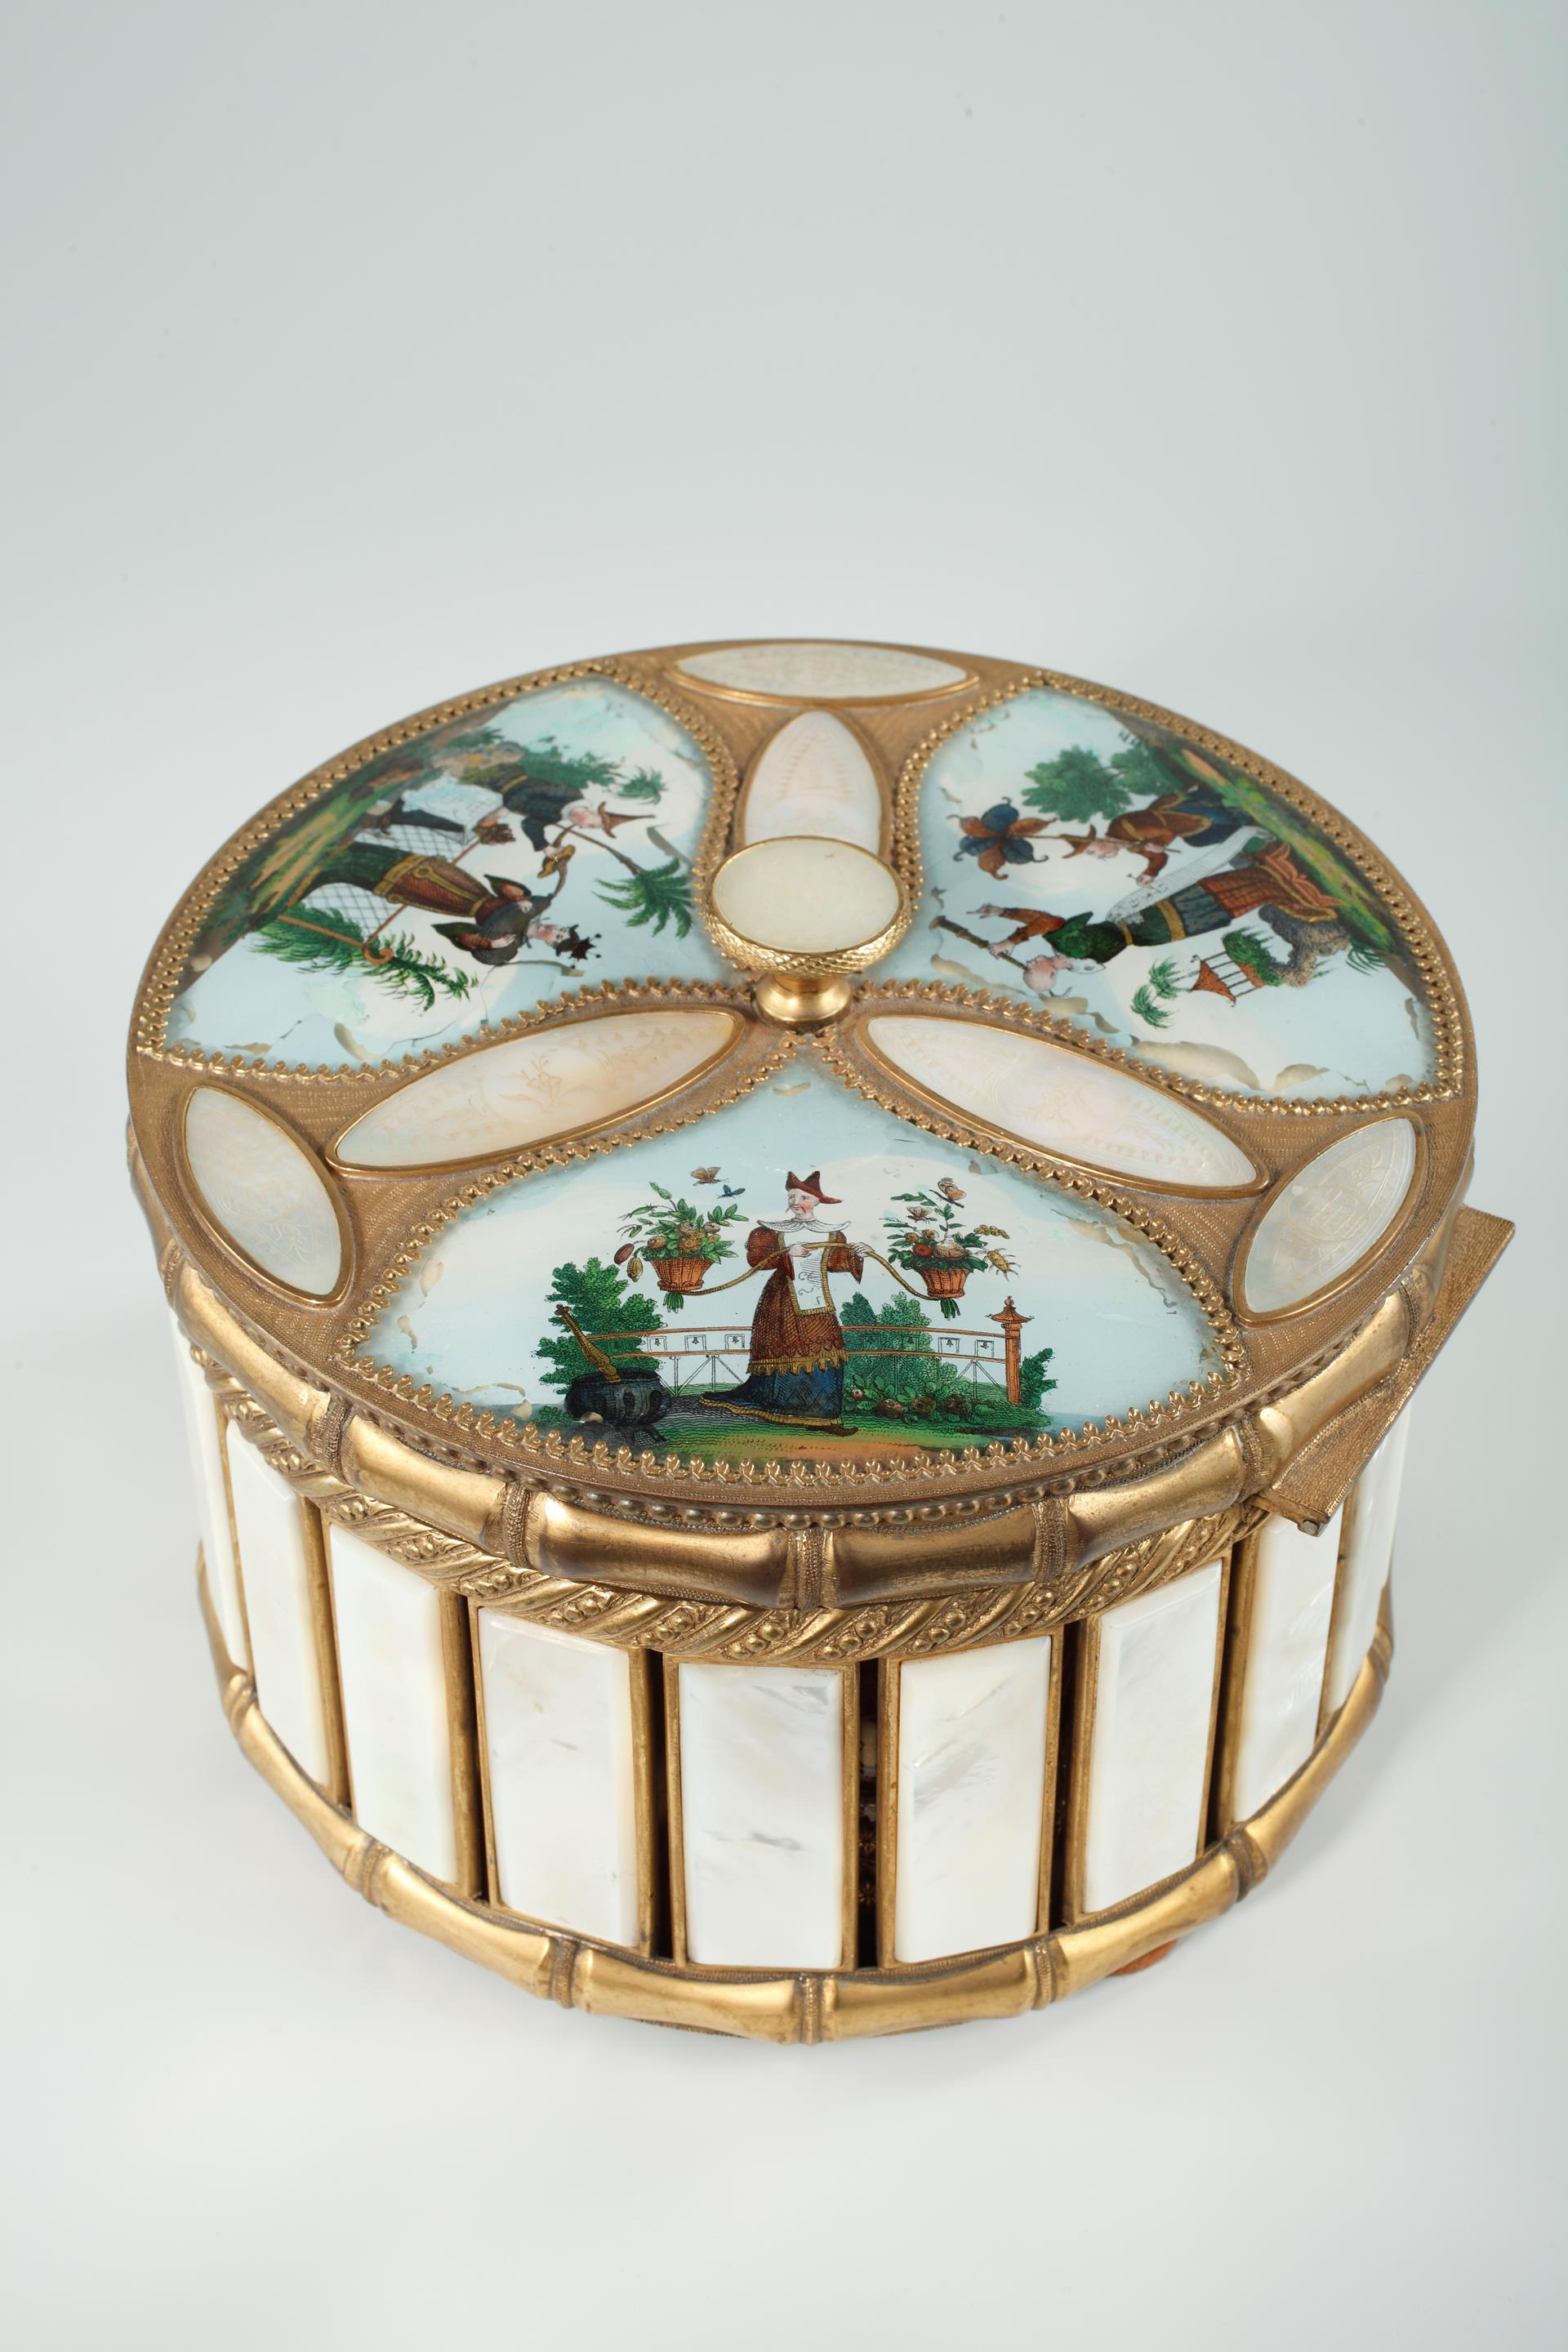 MOTHER OF PEARL AND BRONZE PERFUME BOX WITH ASIAN SCENES; <br/>
NAPOLEON III.